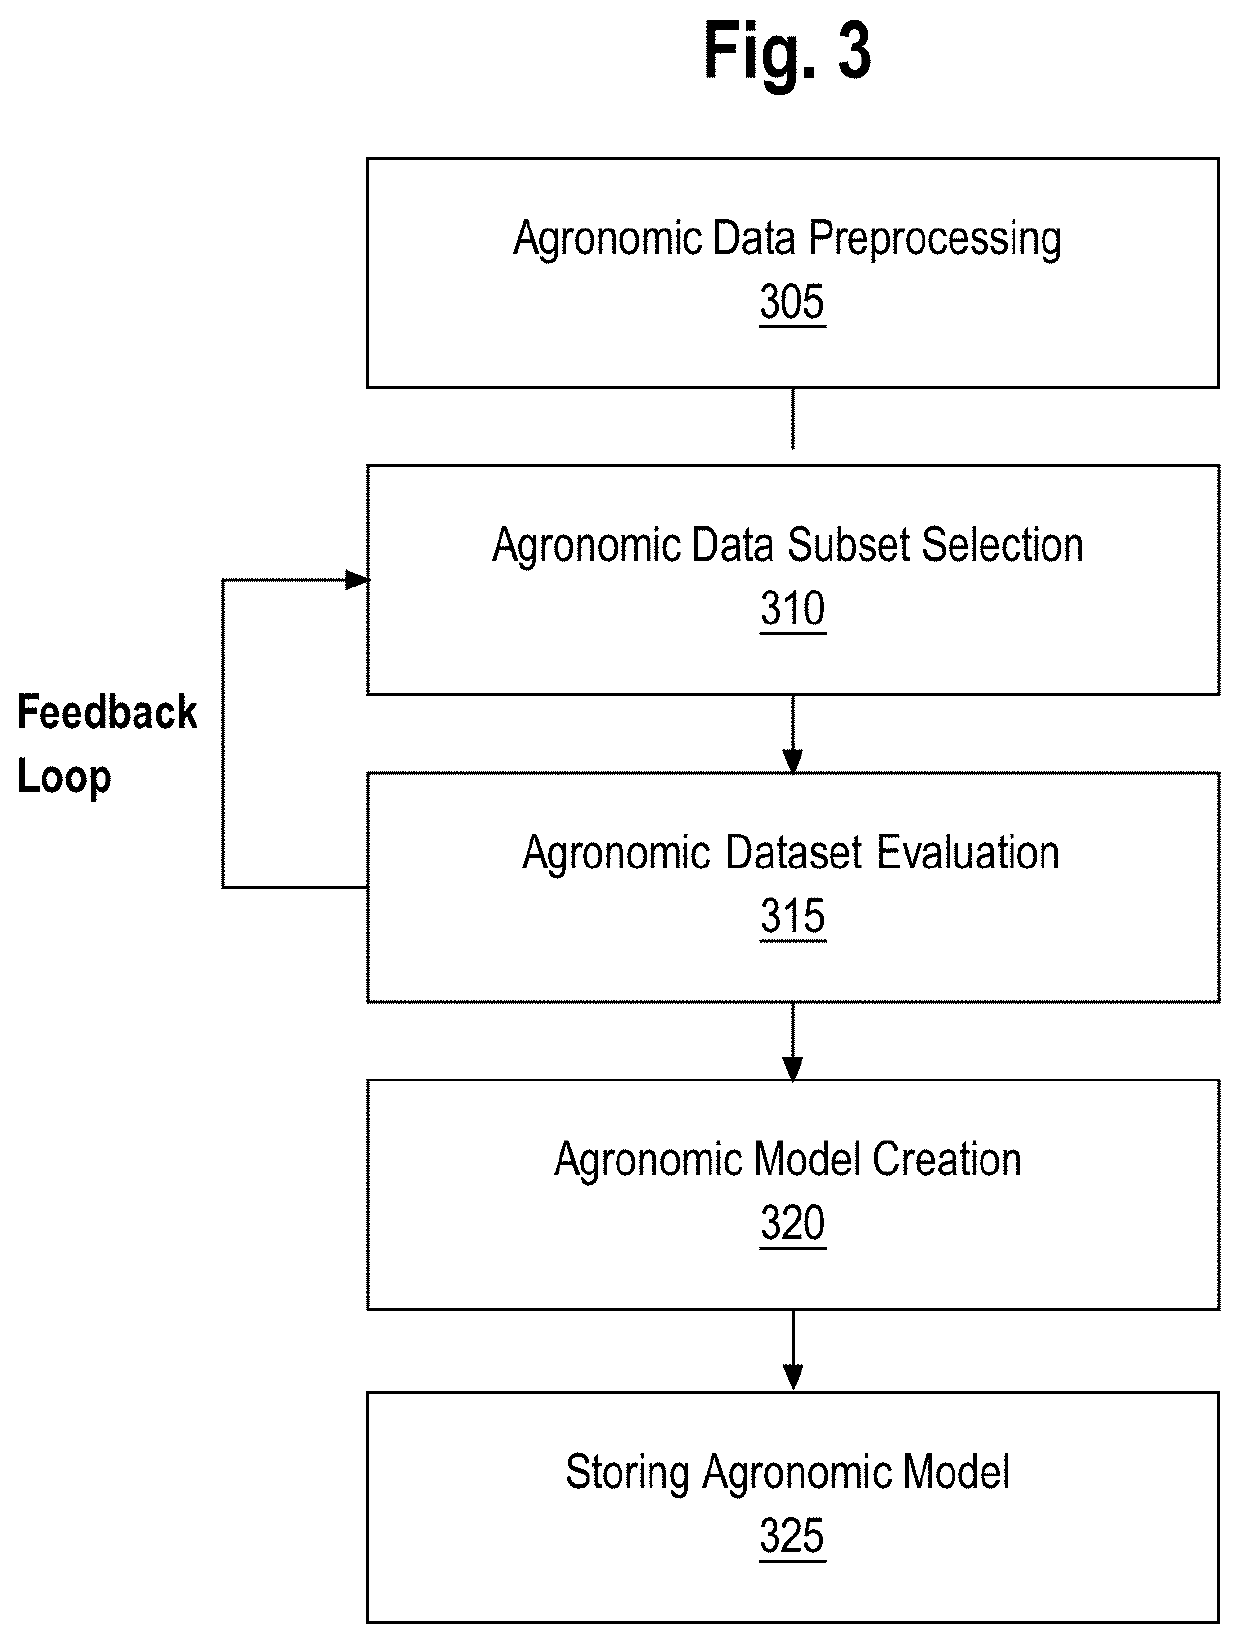 Automatic prediction of yields and recommendation of seeding rates based on weather data